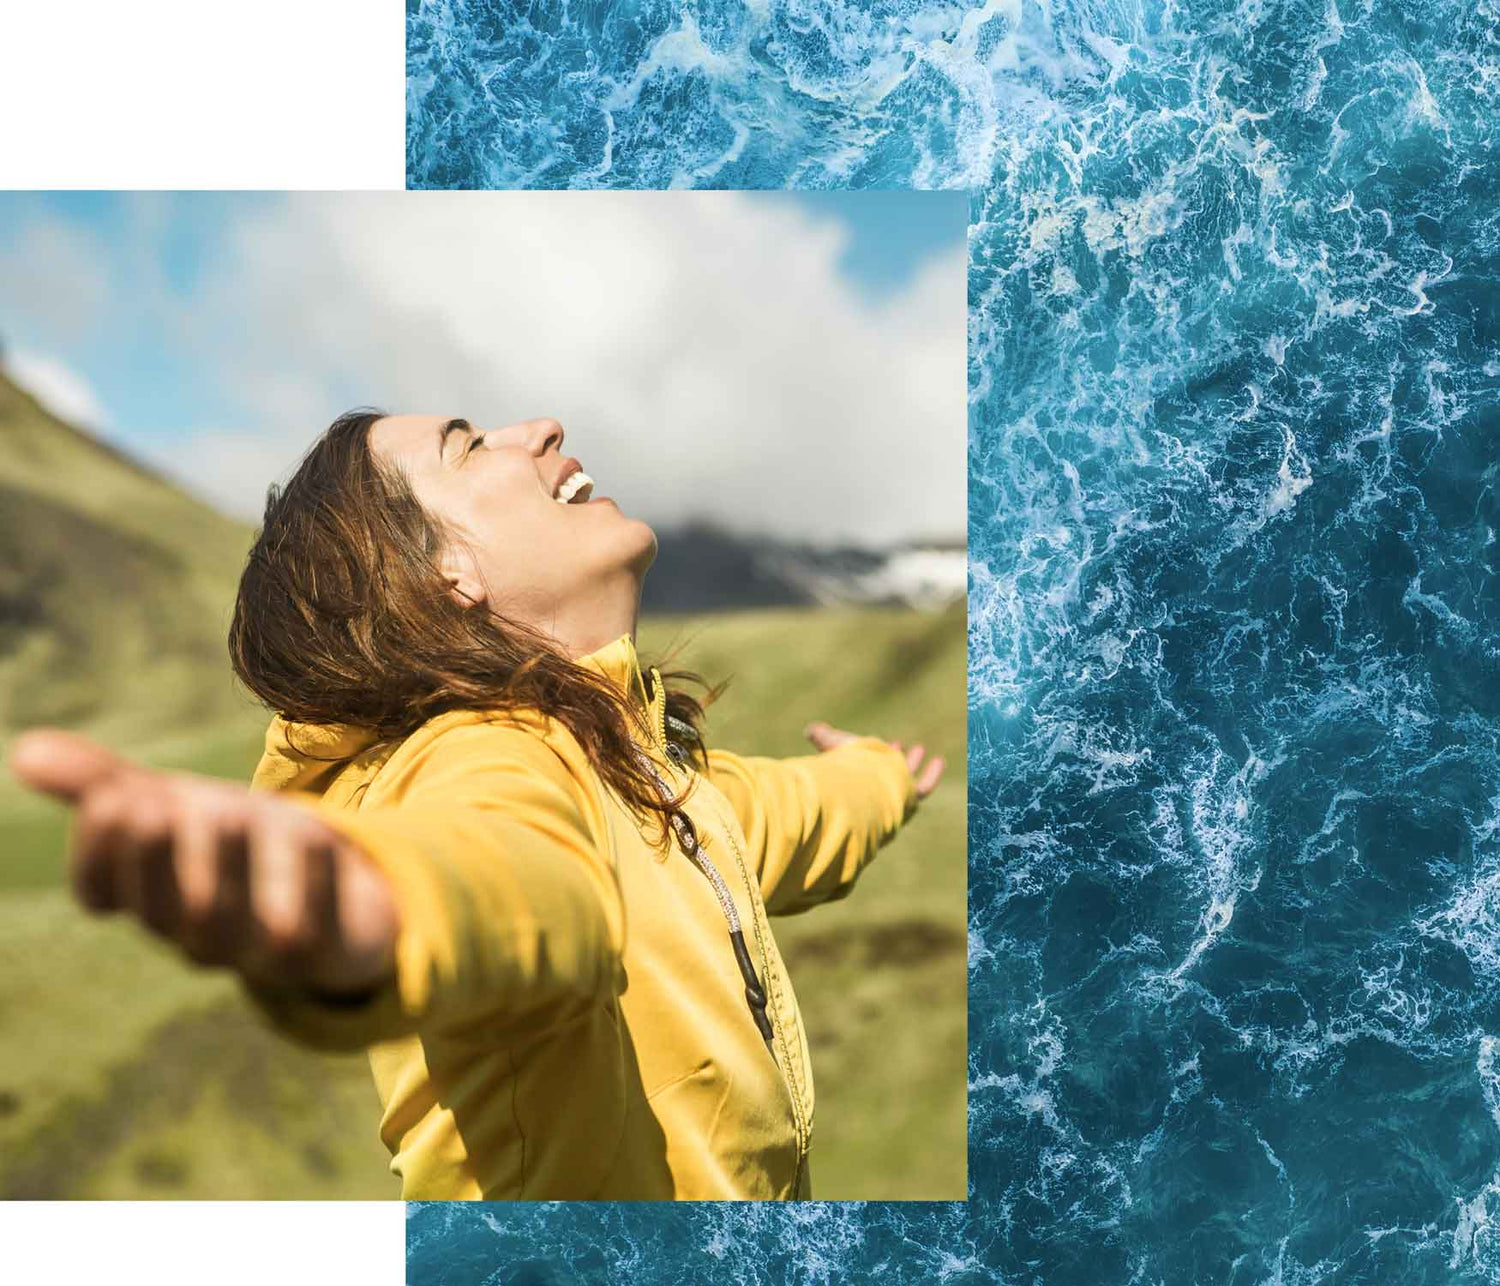 Image of ocean waters overlayed with image of woman in a red jacket in nature, spreading her arms out